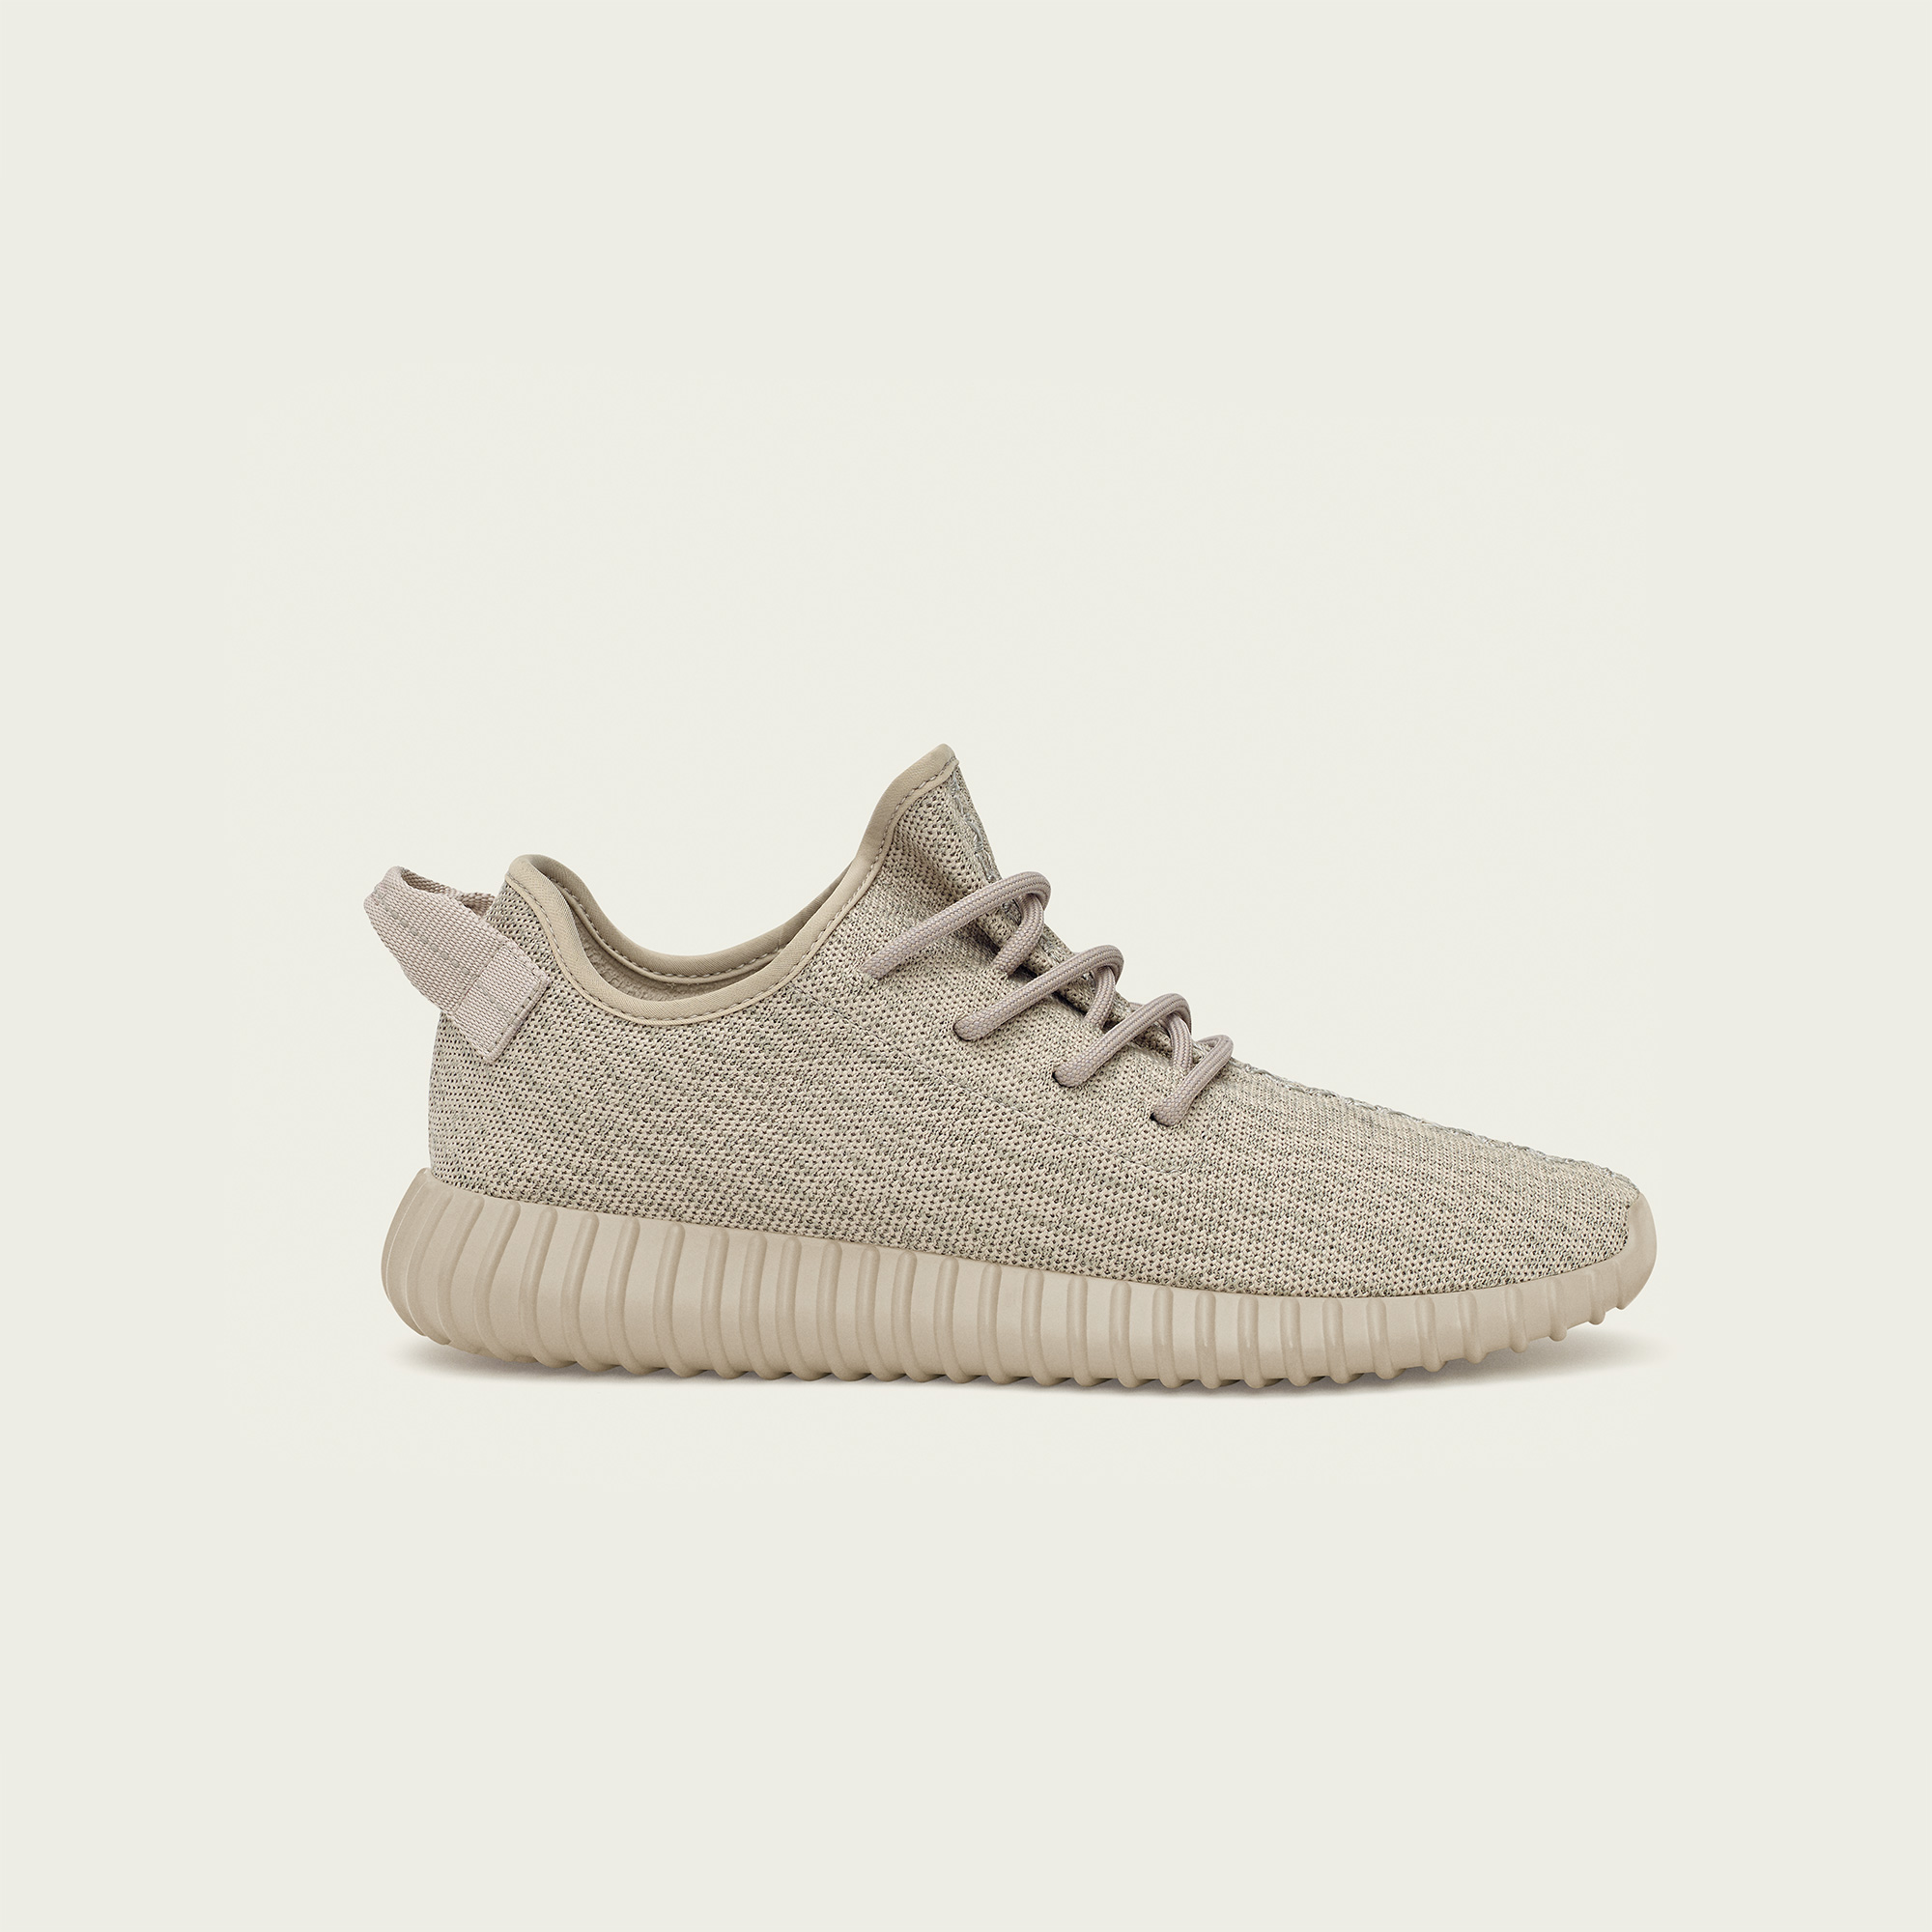 pude nuttet forvisning Where to Cop the adidas Yeezy 350 Boost 'Oxford Tan' - WearTesters